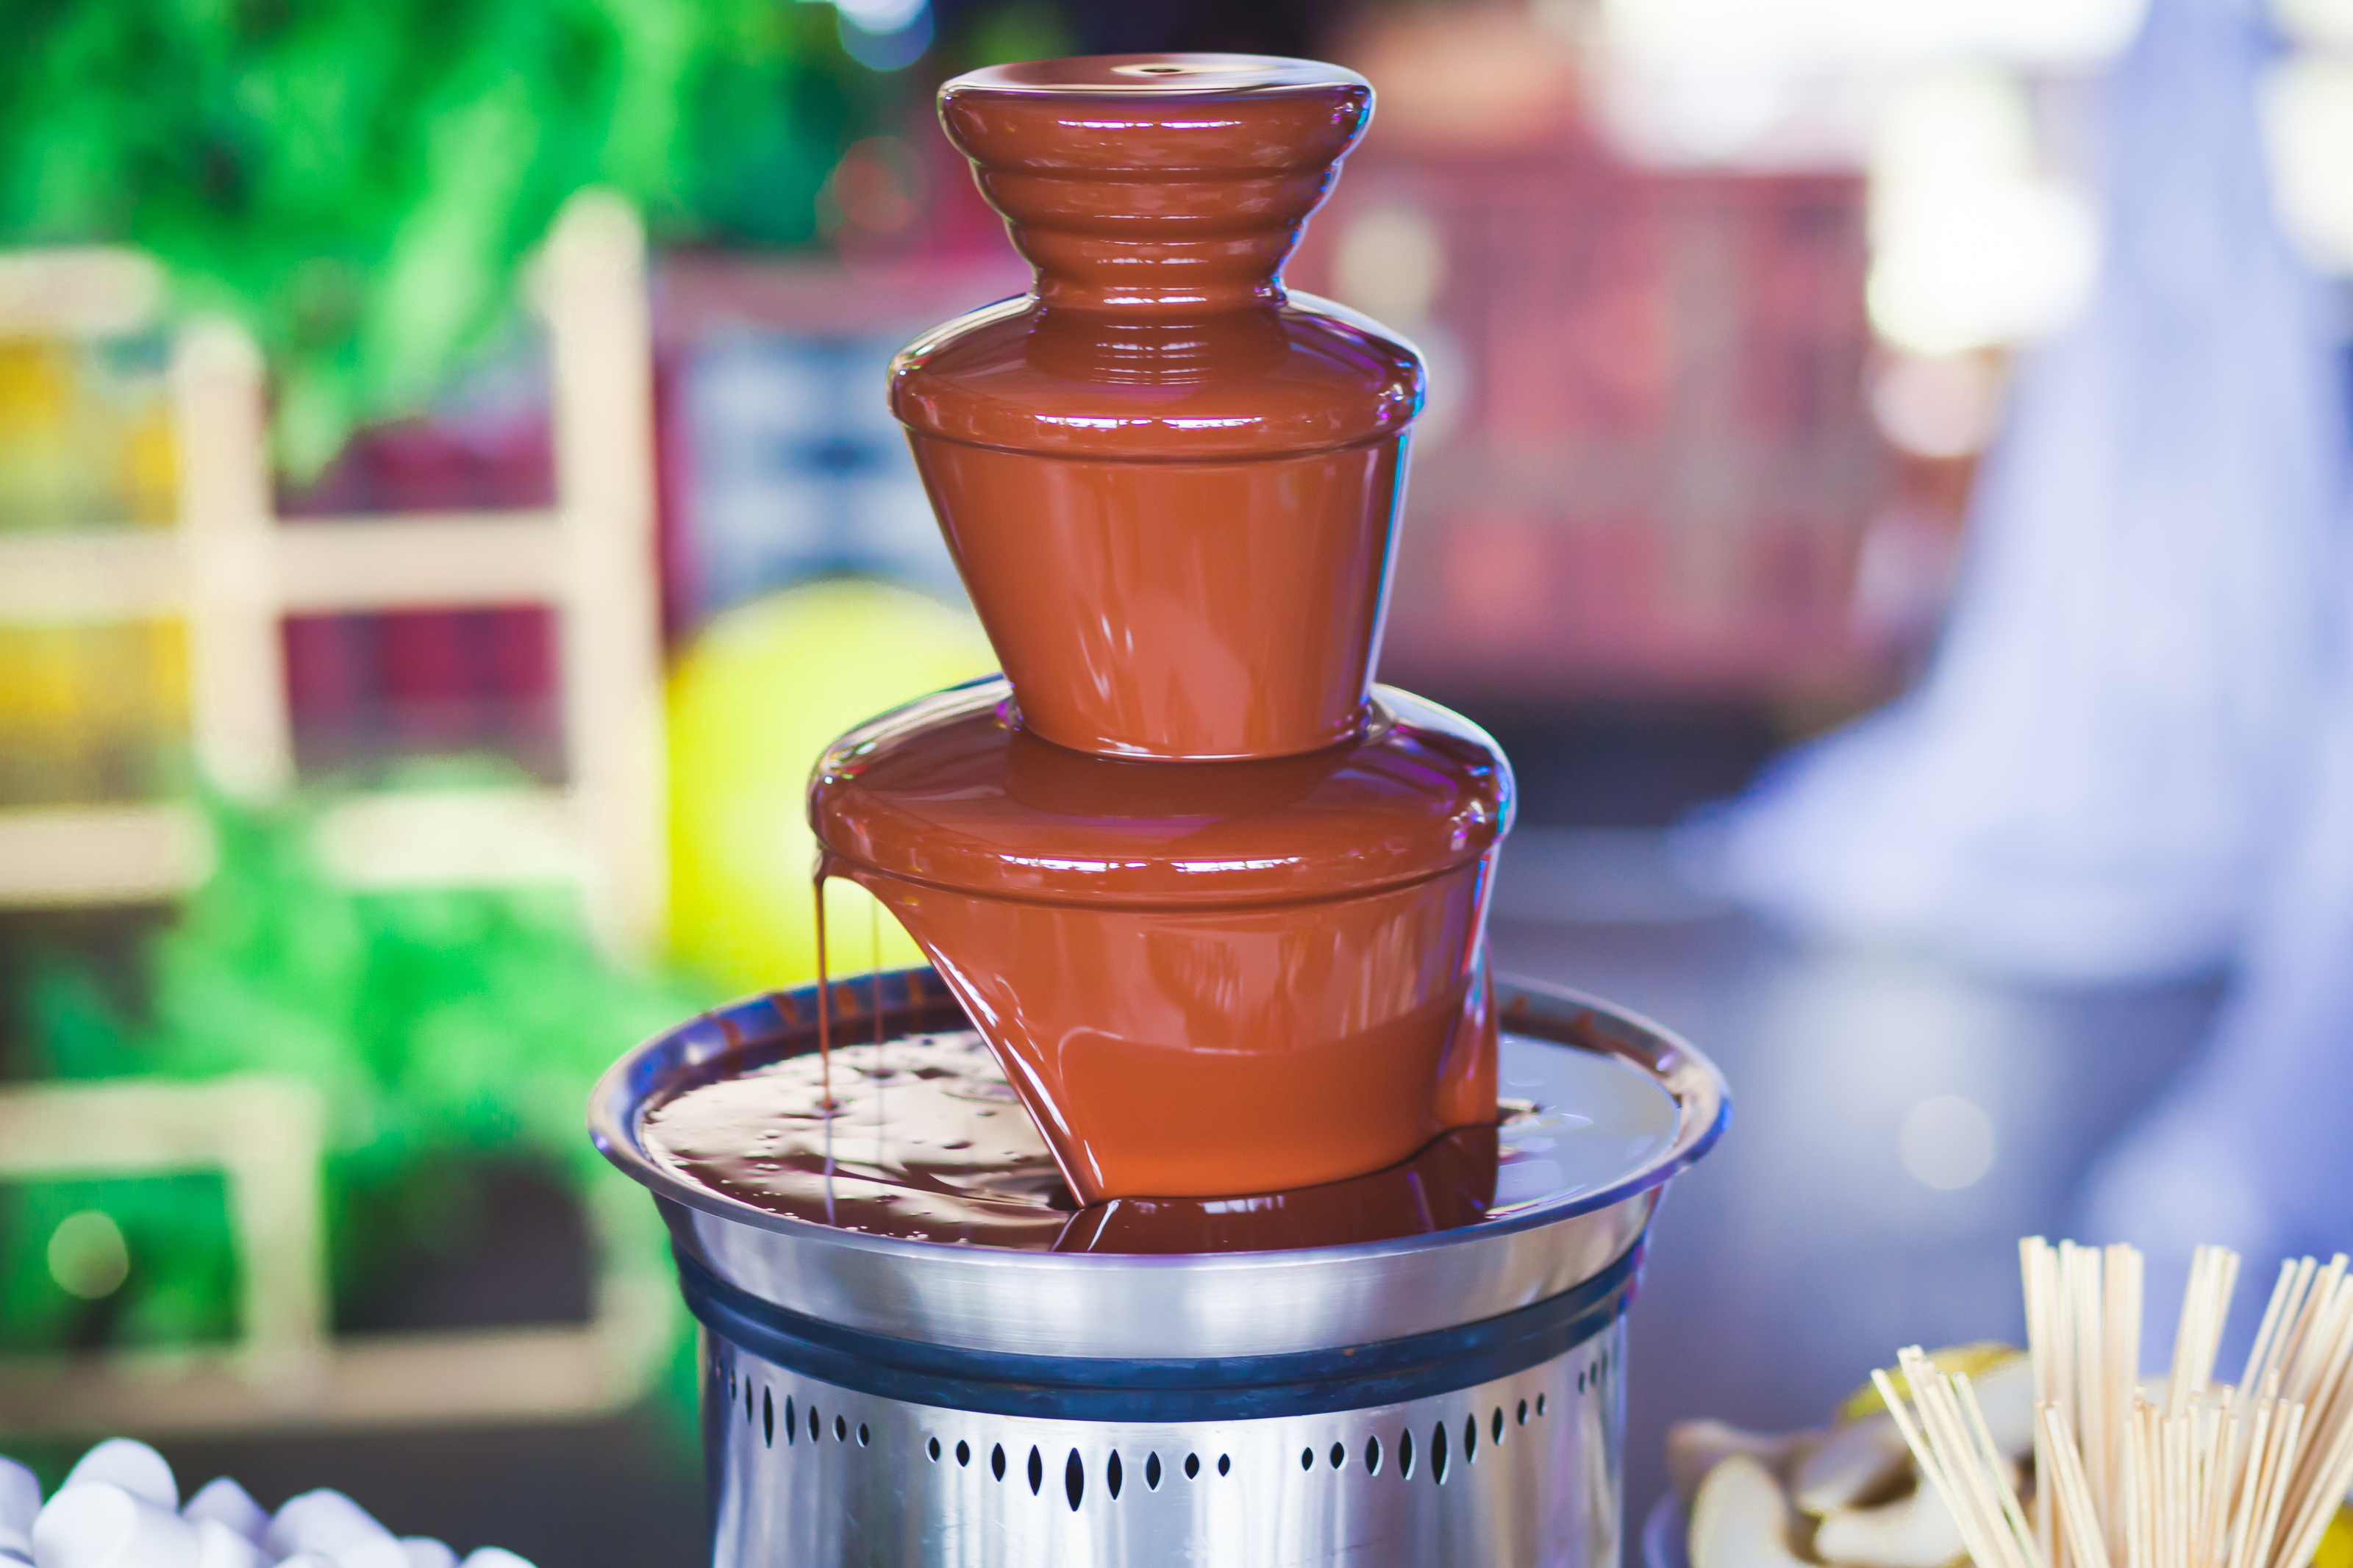 3 Tier Stainless Steel Fondue Pot Chocolate Melting Machine Dipping Dessert Fruits Butter Cheese for Christmas Birthday Wedding Party Celebration US Stock Chocolate Fondue Fountain 